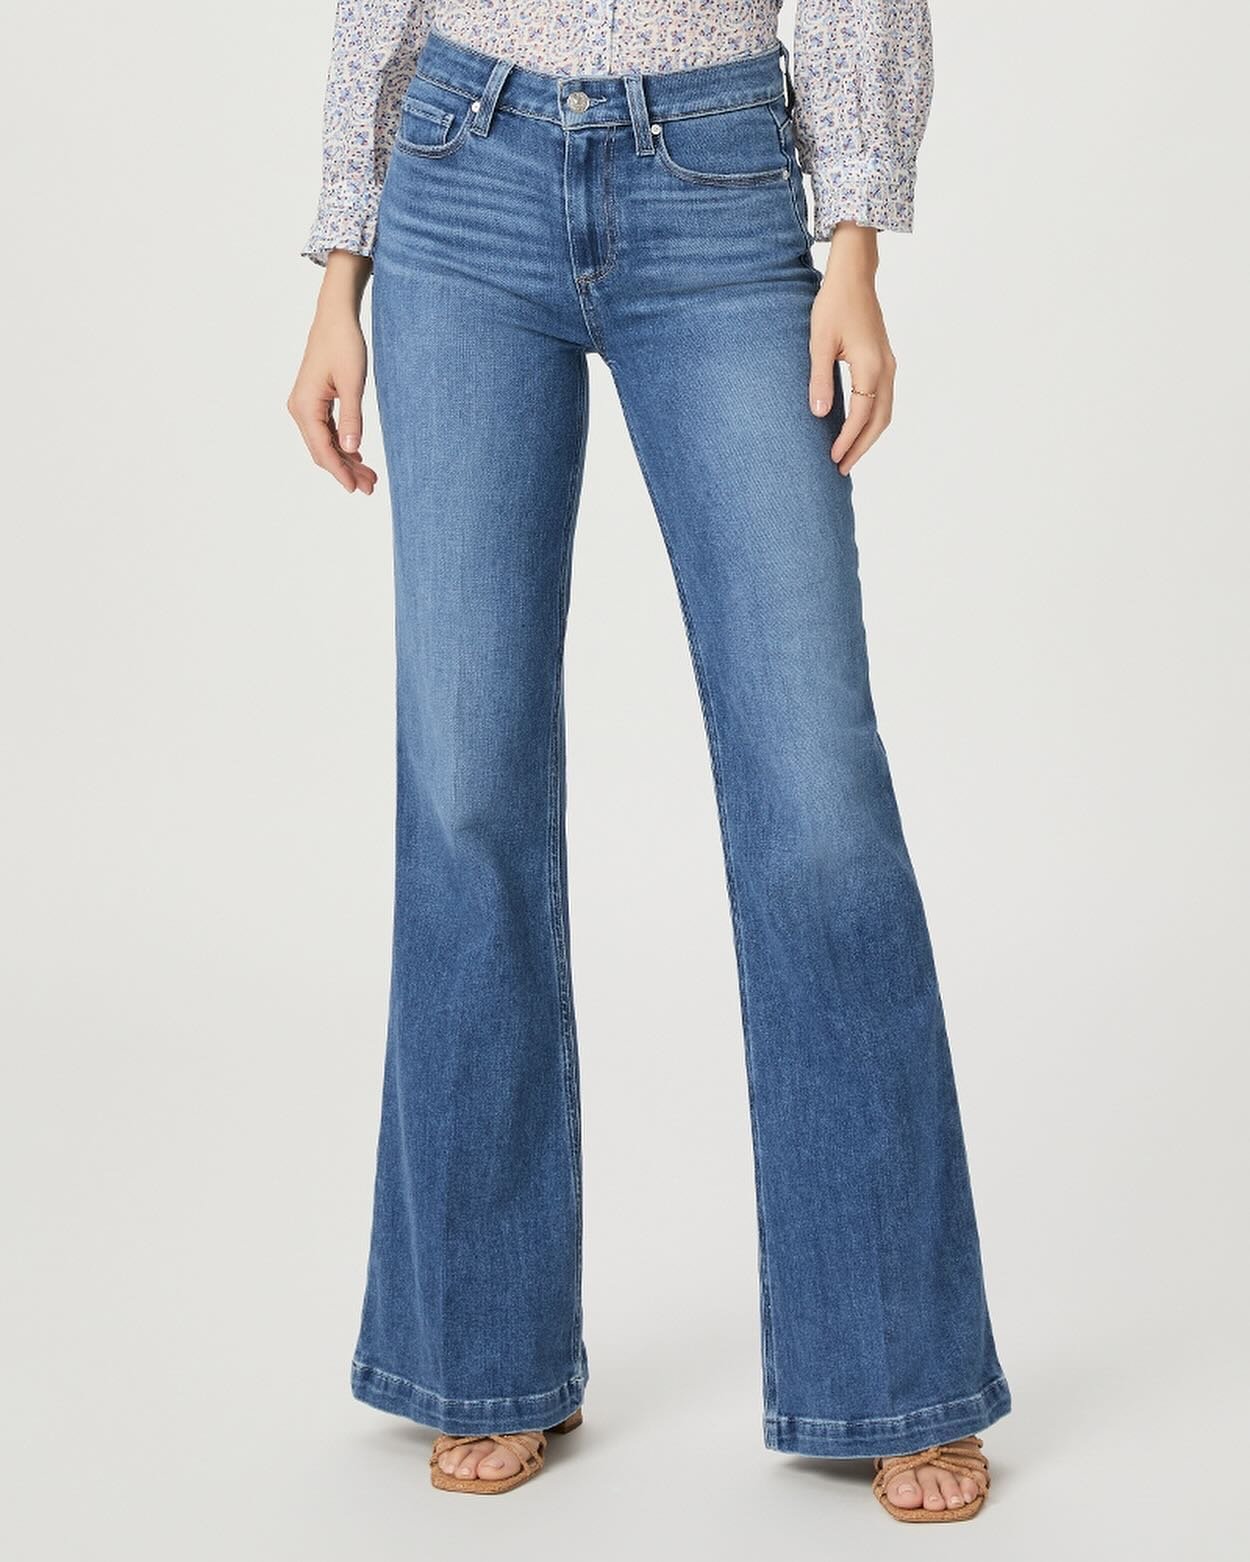 Meet Genevieve&hellip;. Genevieve is the perfect vintage-inspired, high-rise flare silhouette that gives your legs a long, lean look. Cut from our TRANSCEND VINTAGE denim in a bright medium blue wash, this style has the look of authentic vintage deni